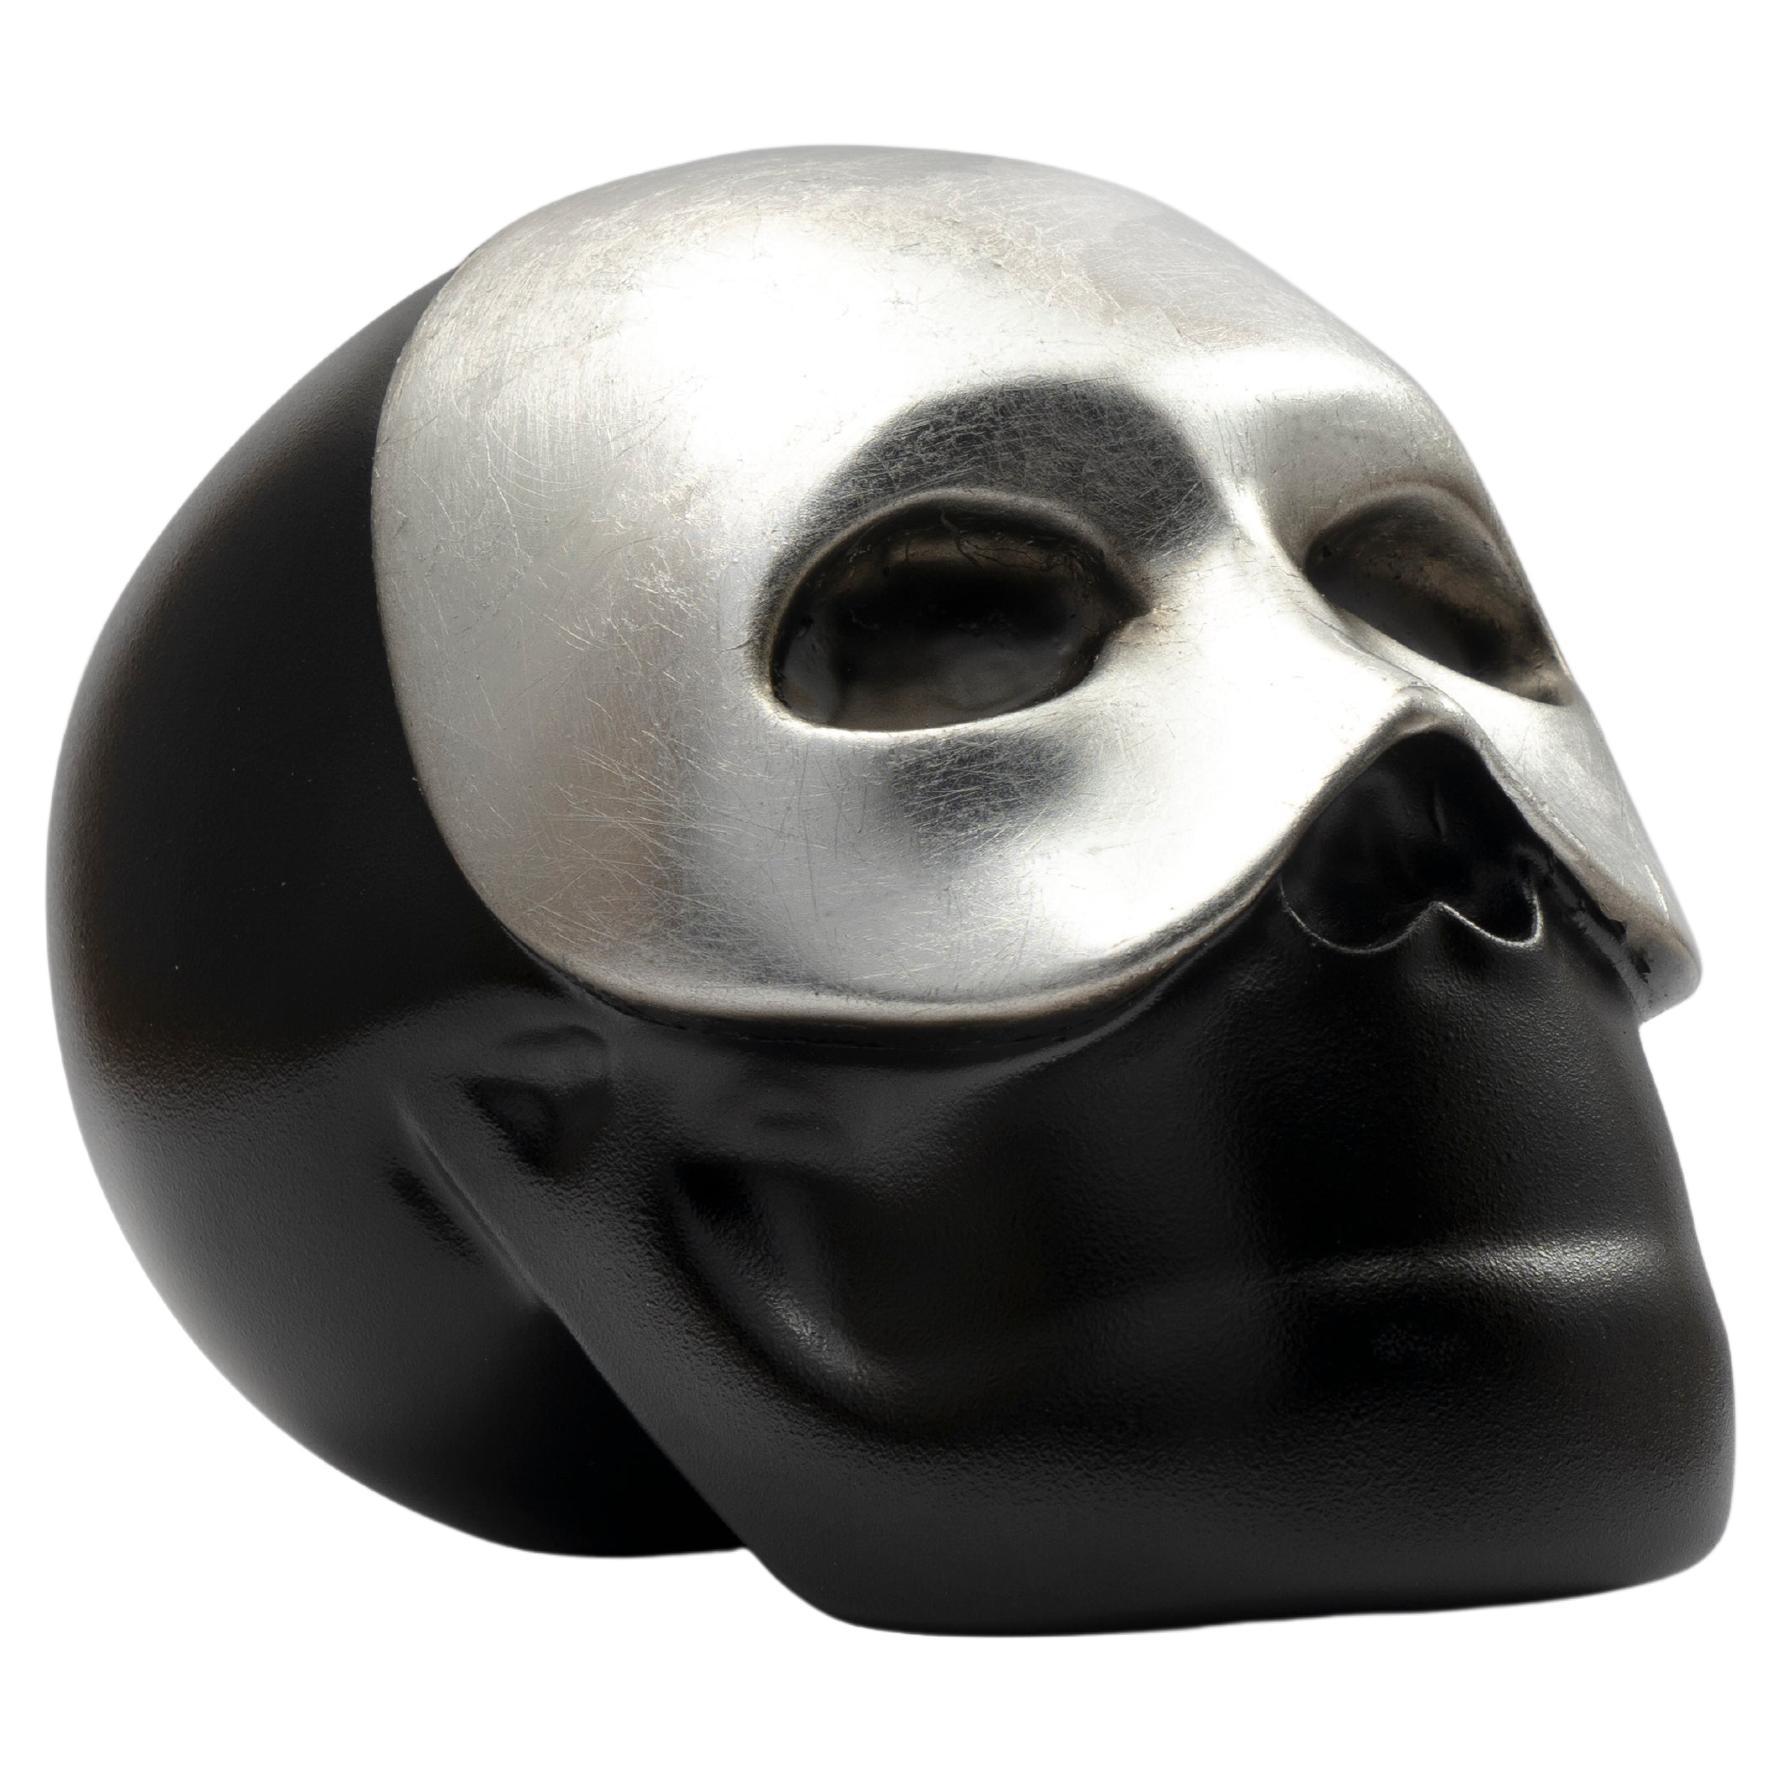 THE SKULL "Silver Lining" hand-painted resin sculpture by Gio Pagani For Sale